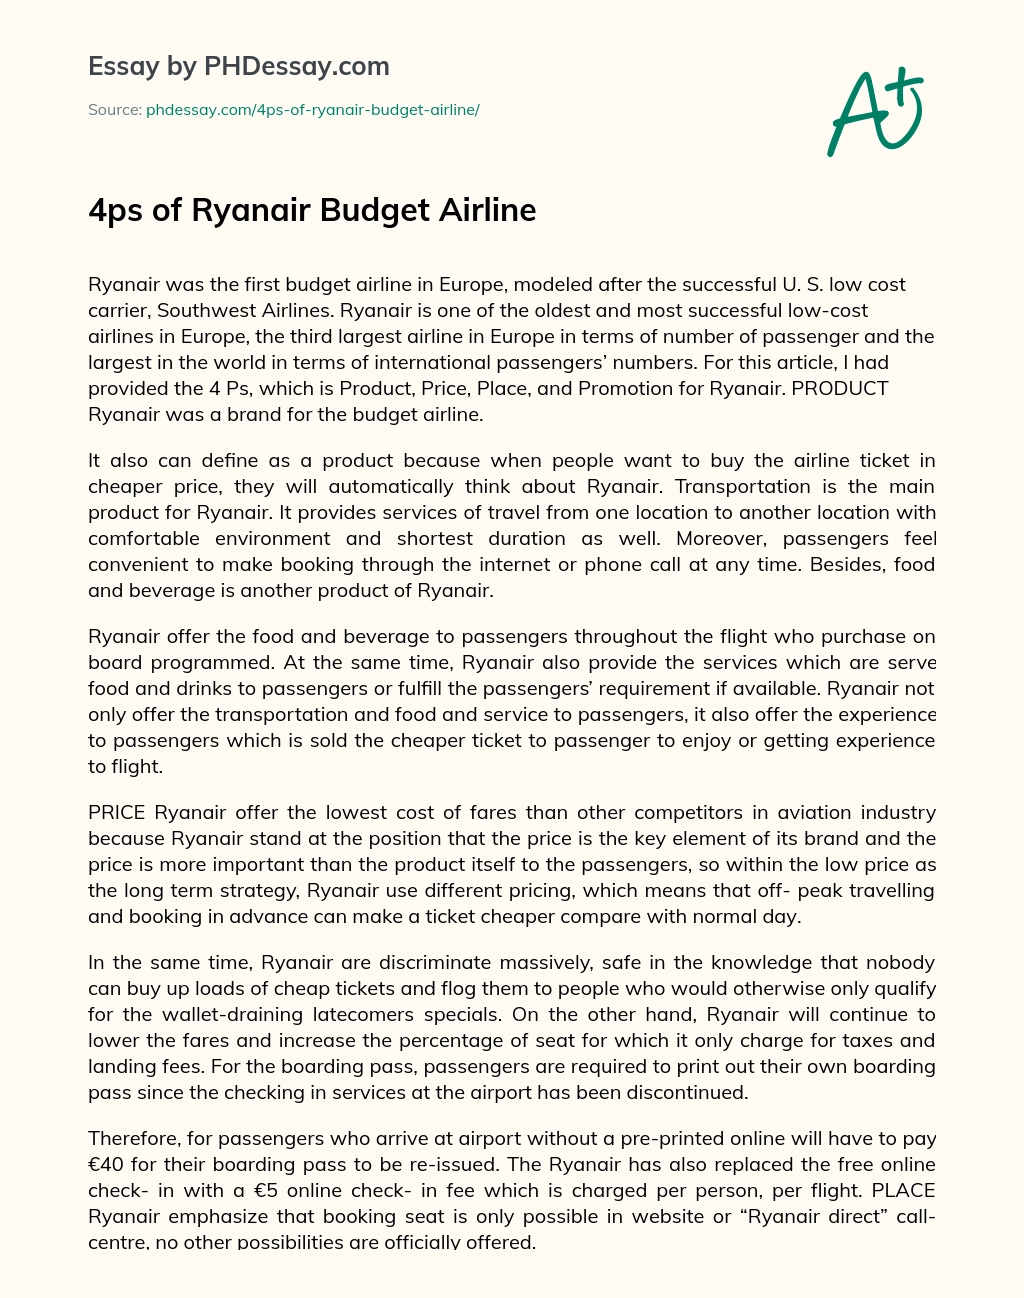 4ps of Ryanair Budget Airline essay